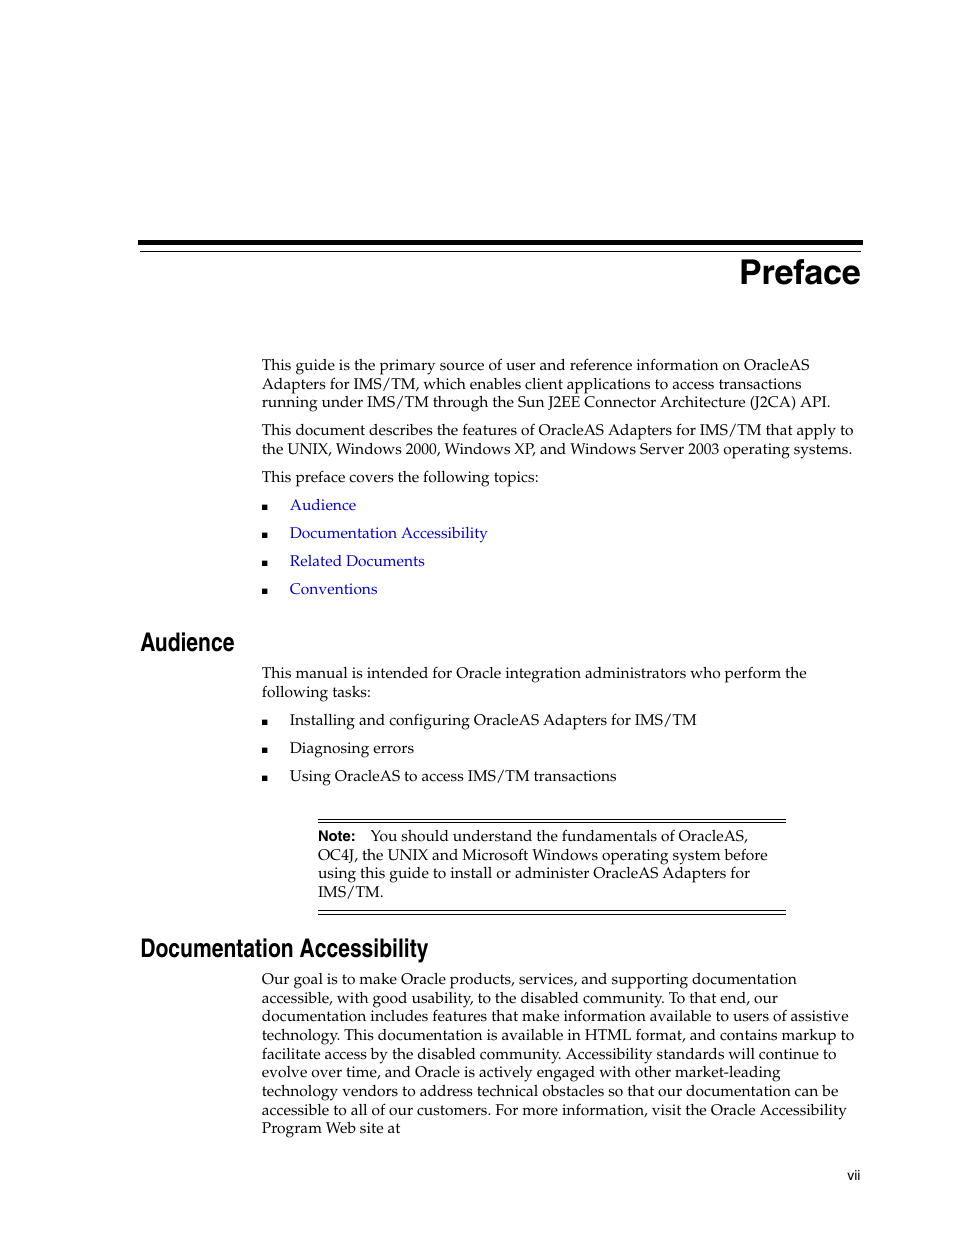 Preface, Audience, Documentation accessibility | Oracle Audio Technologies B31003-01 User Manual | Page 7 / 112